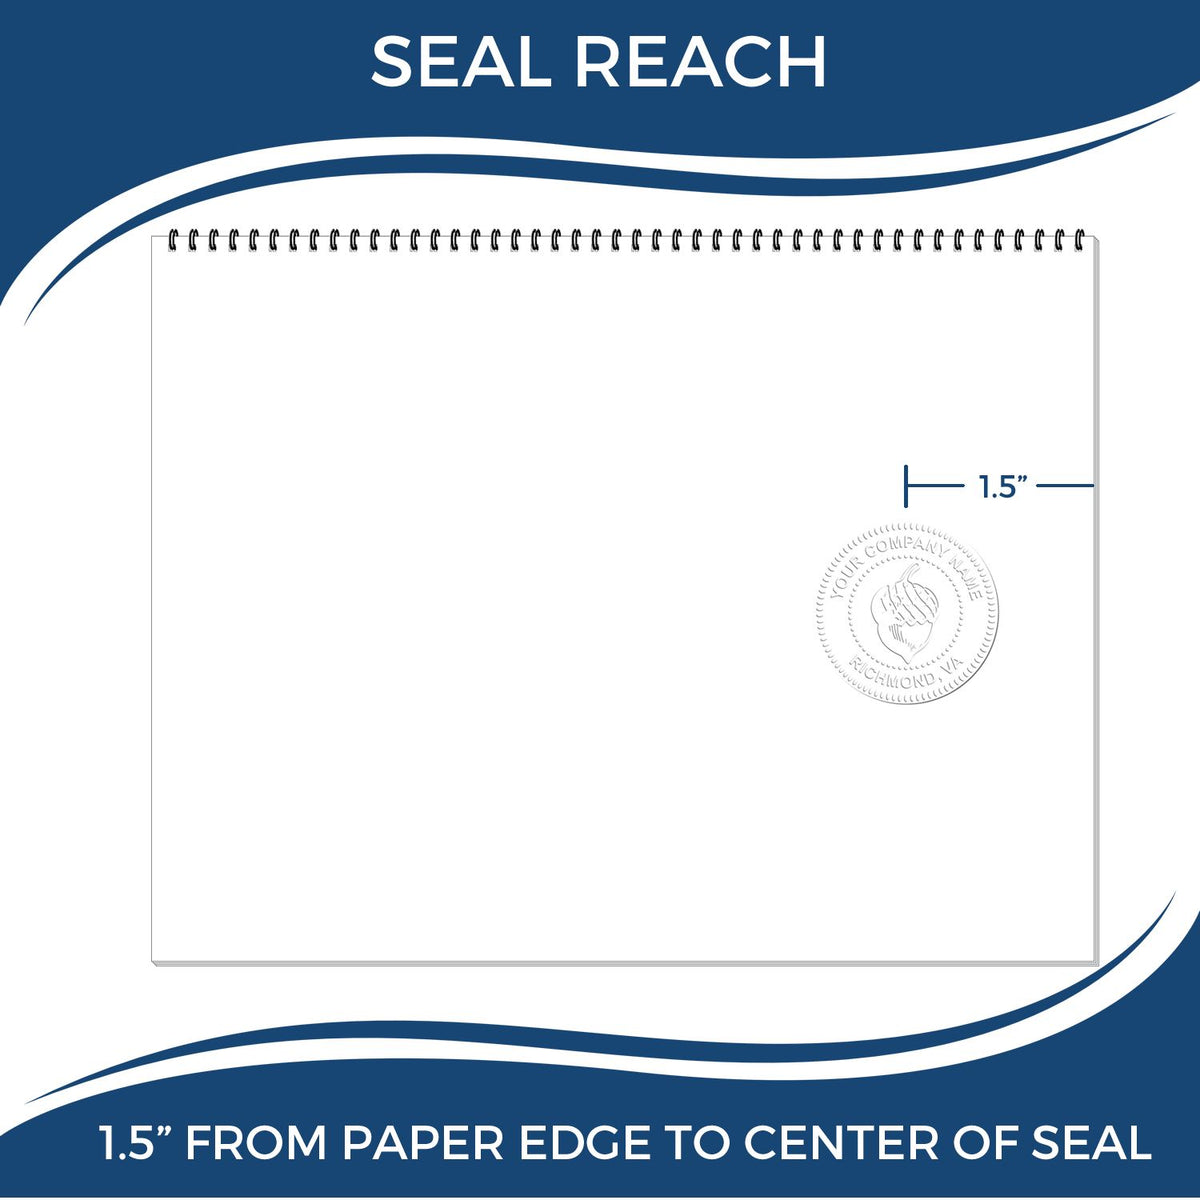 An infographic showing the seal reach which is represented by a ruler and a miniature seal image of the Soft Pocket Georgia Landscape Architect Embosser